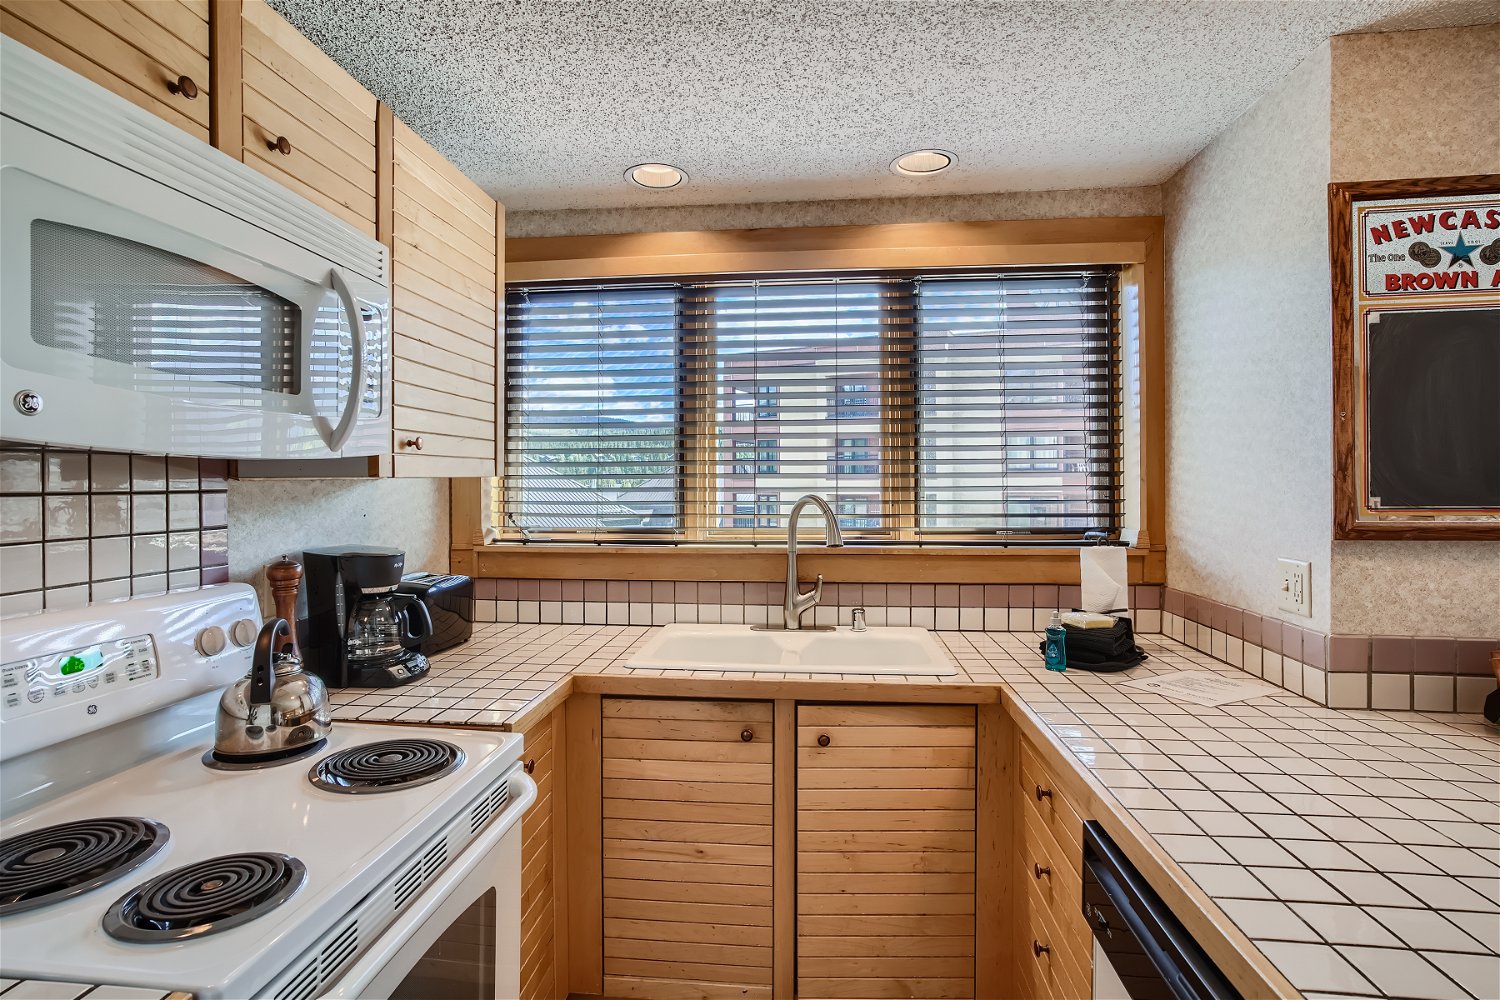 Full kitchen with toaster over, standard drip coffee maker, kettle, and more